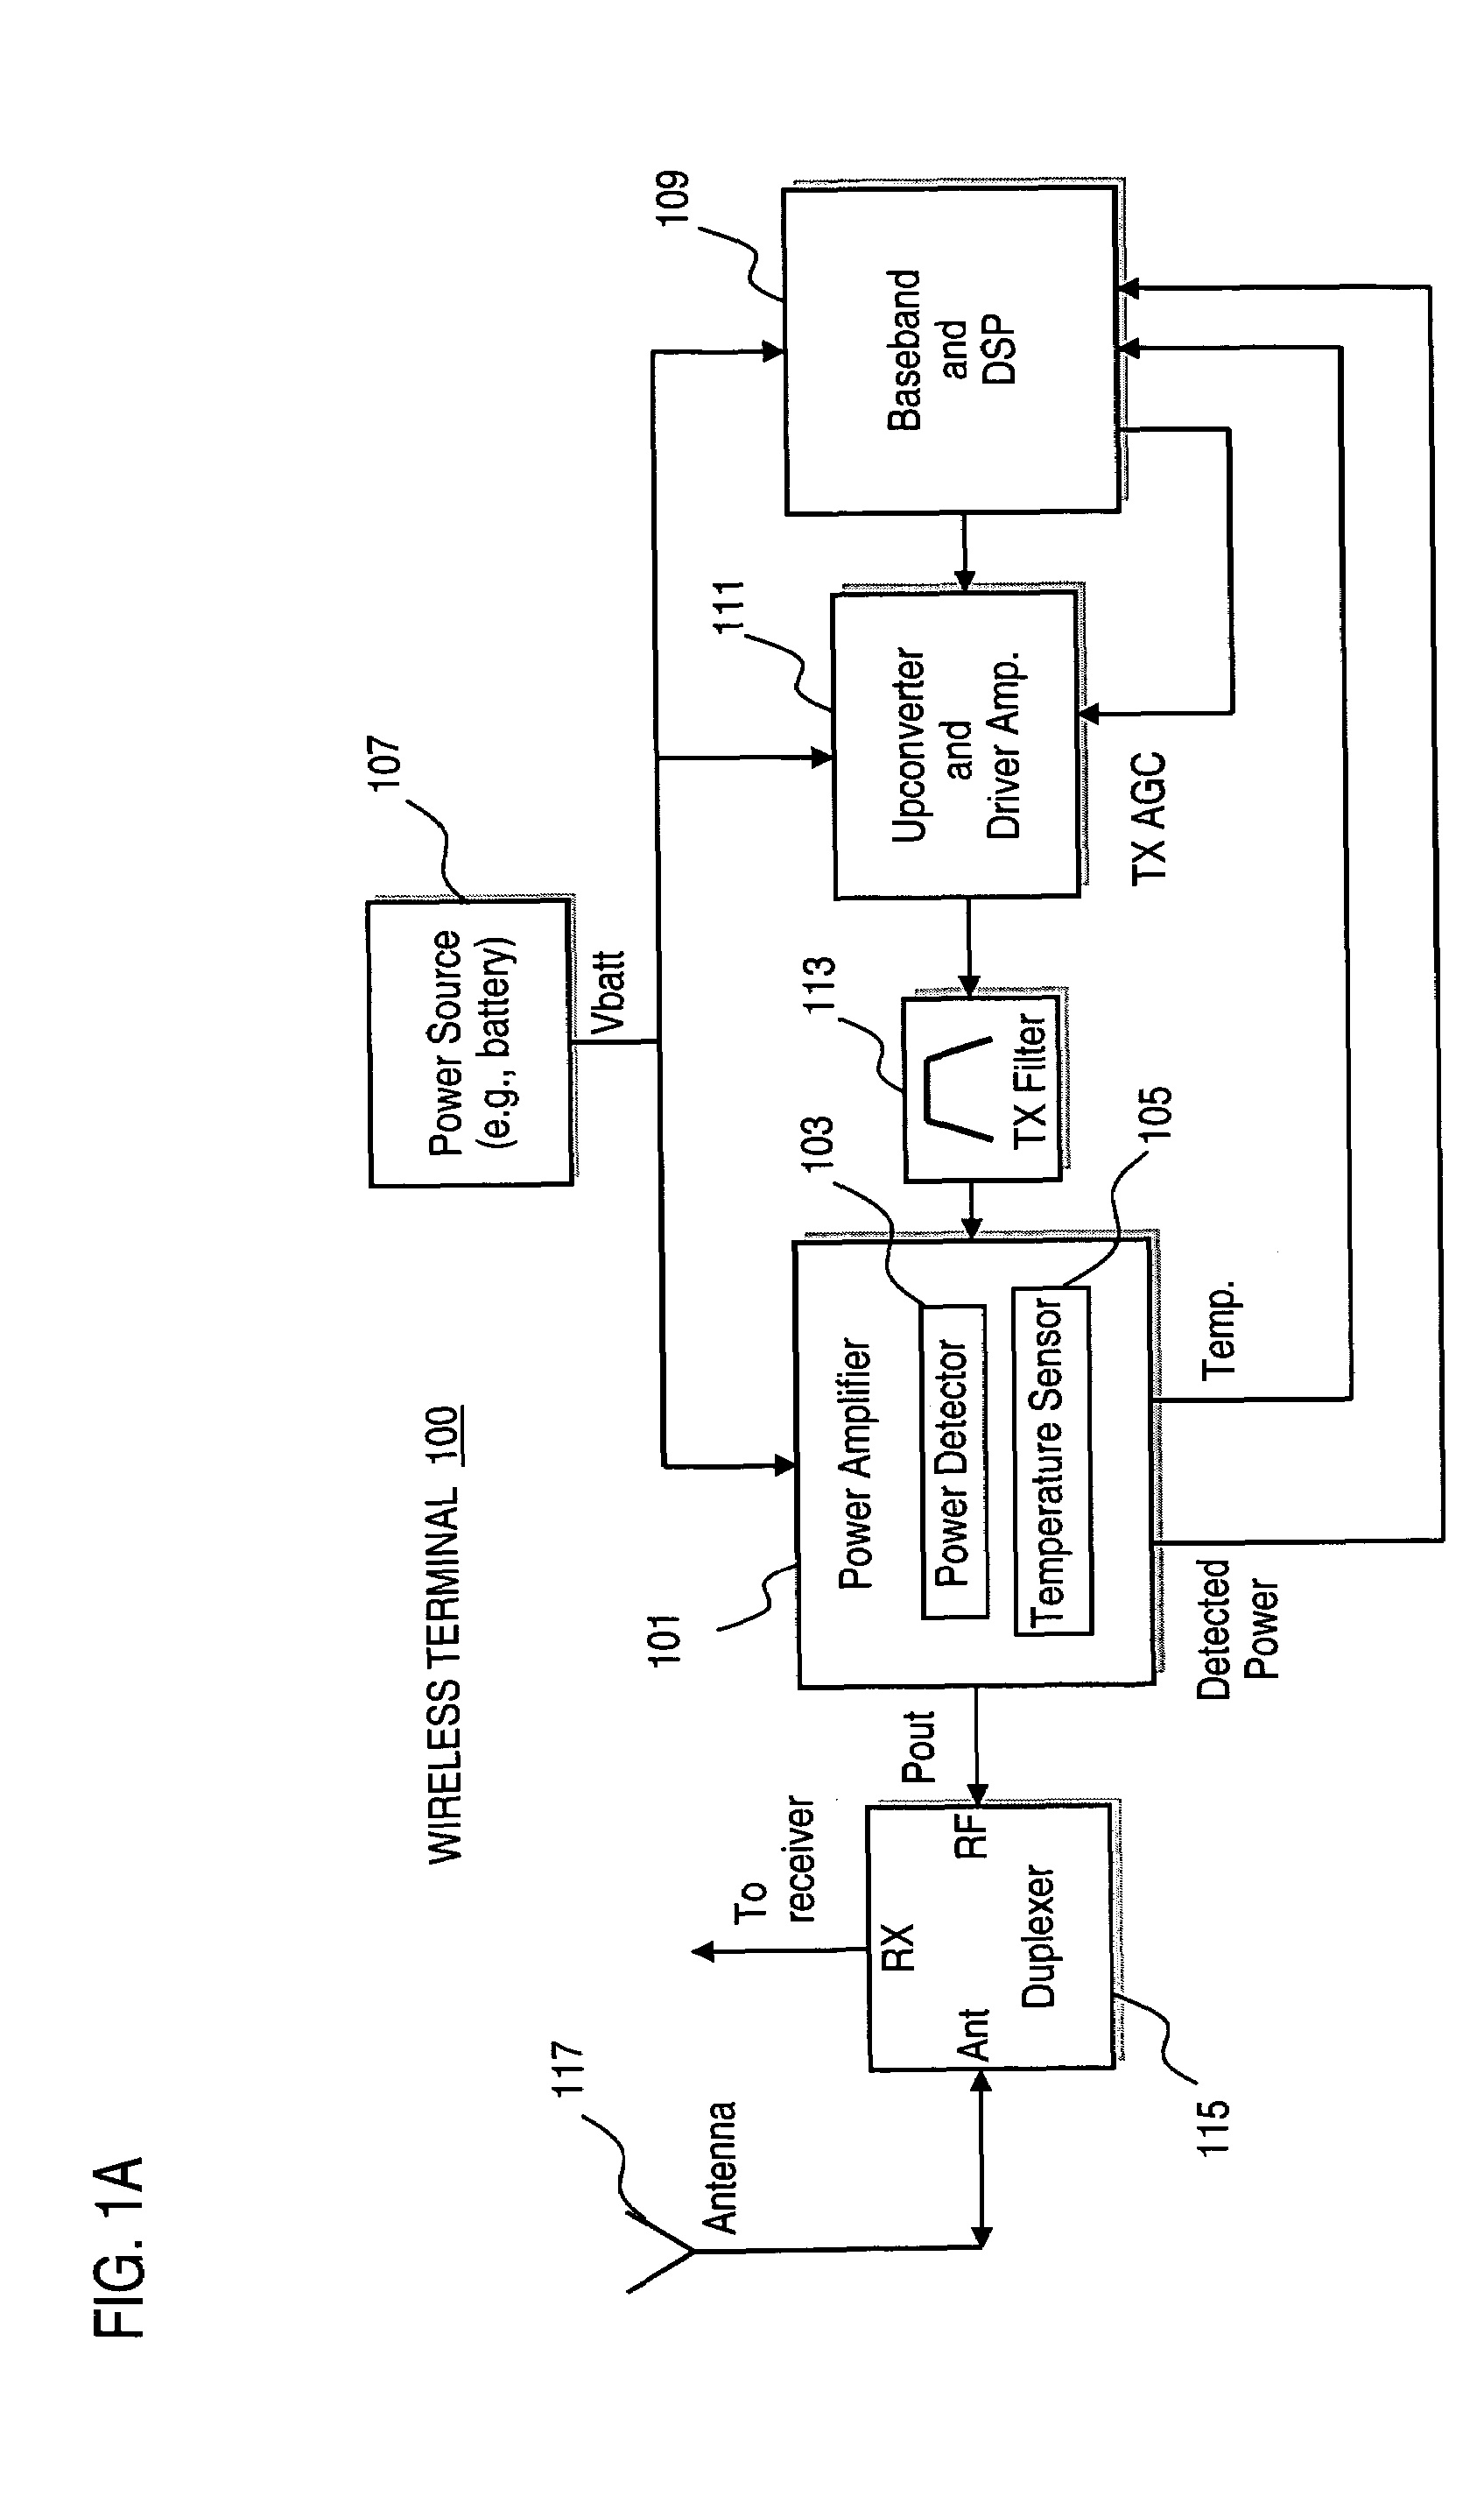 Method and apparatus for providing limiting power adjustment in a wireless communication system